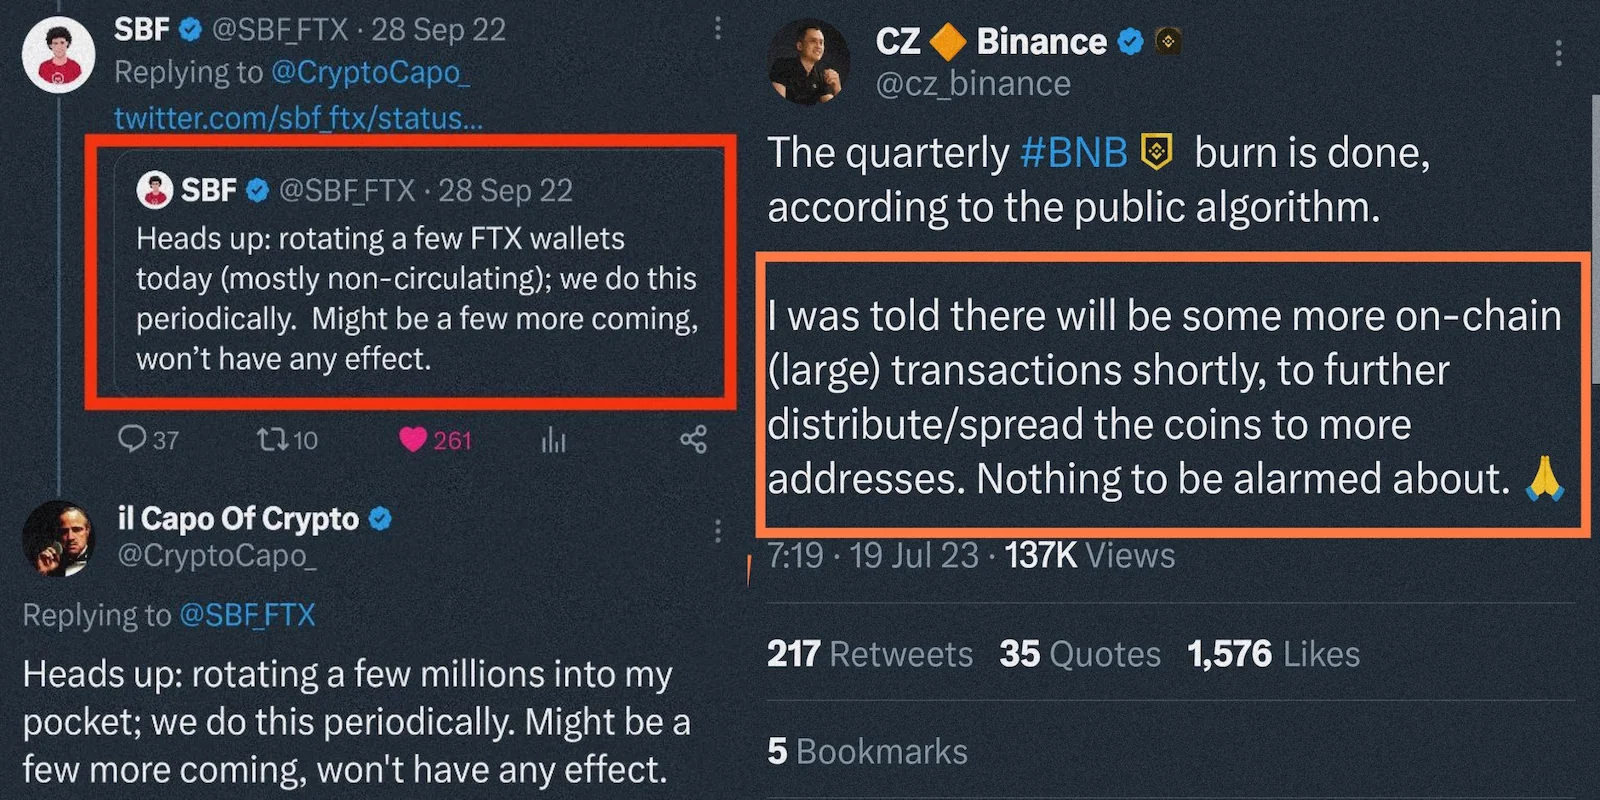 Analyst Crypto Capo highlighted similarities between SBF's and CZ's tweets.